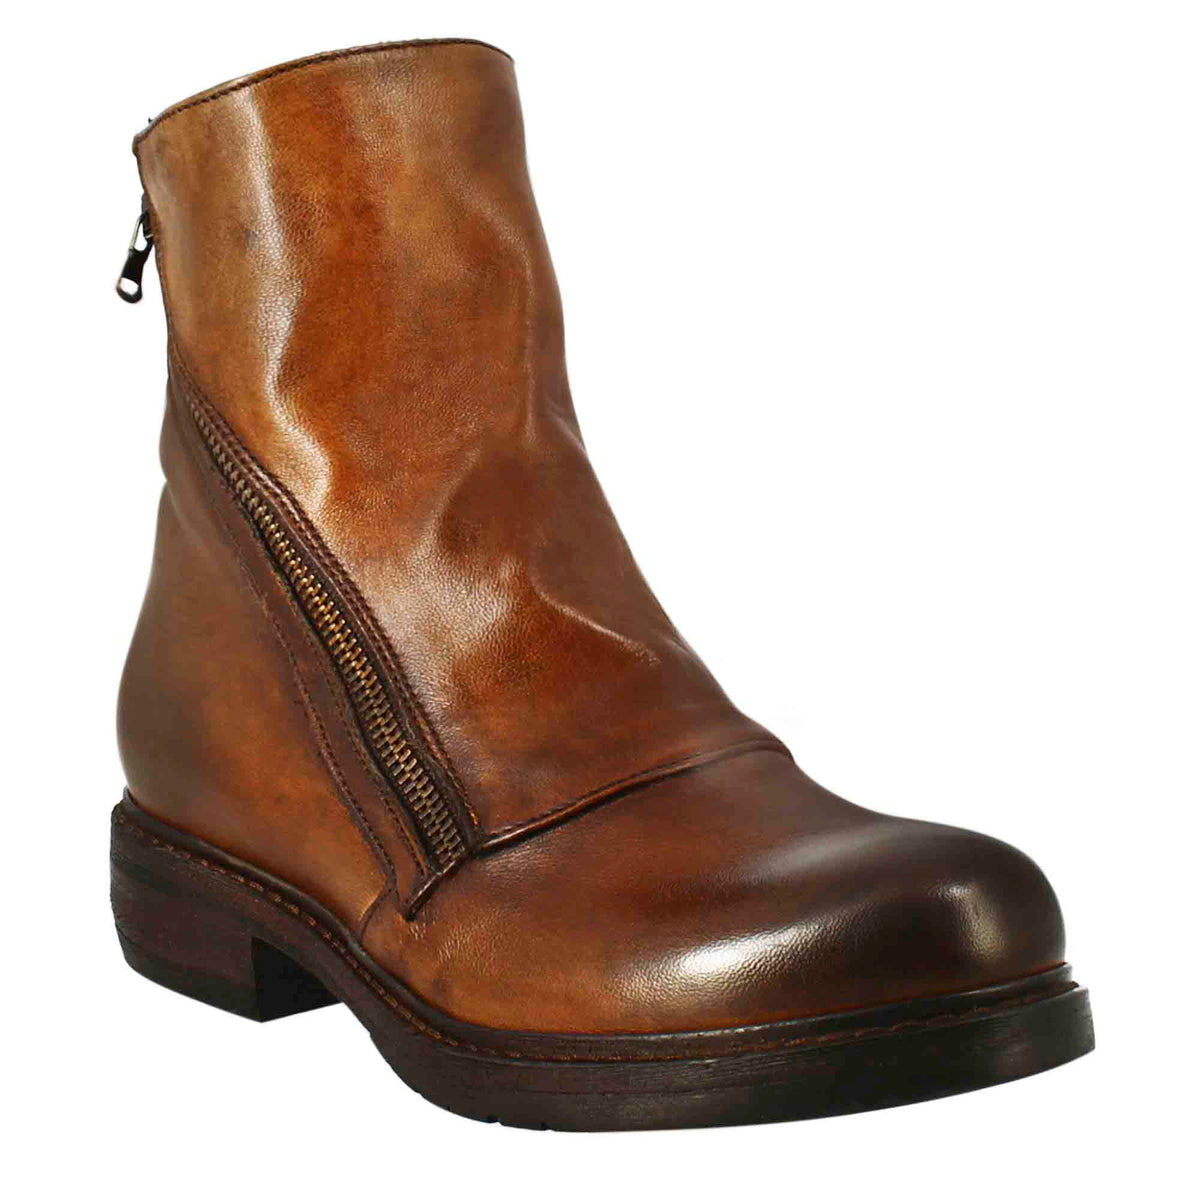 Paupa women's ankle boot in dark tan colored washed leather with diagonal zip